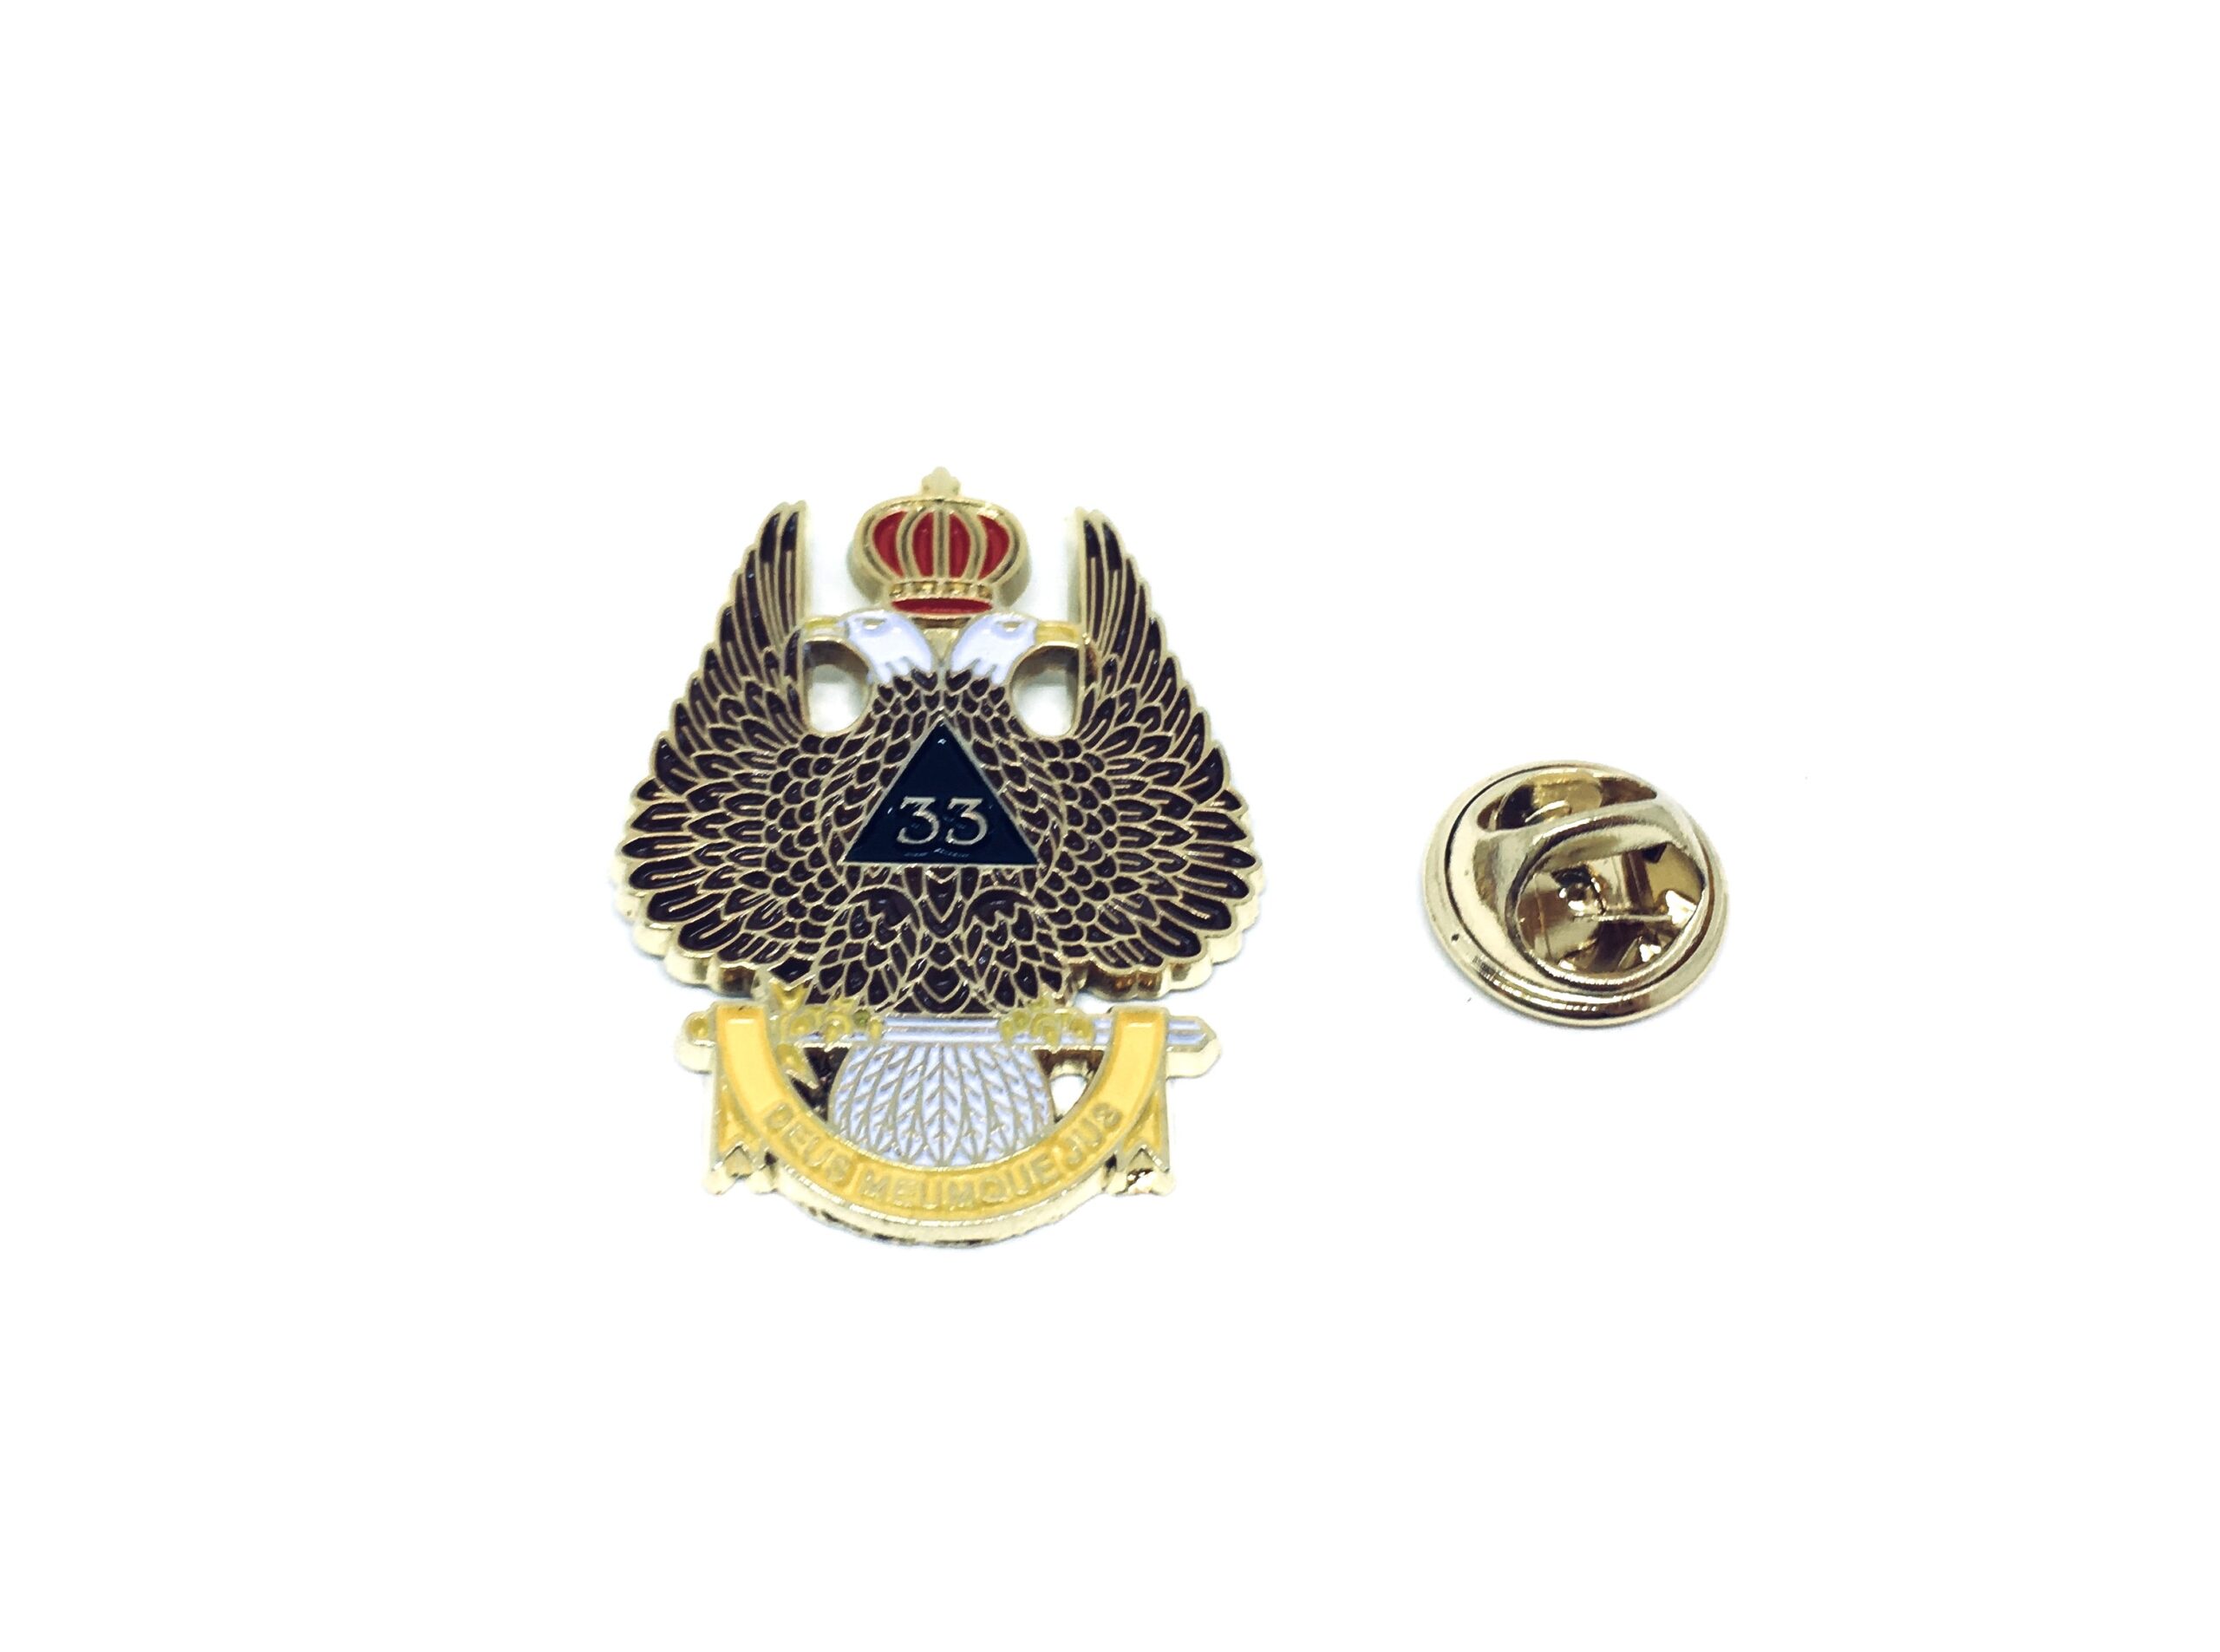 33rd Degree Double Headed Eagle Brooch Pin